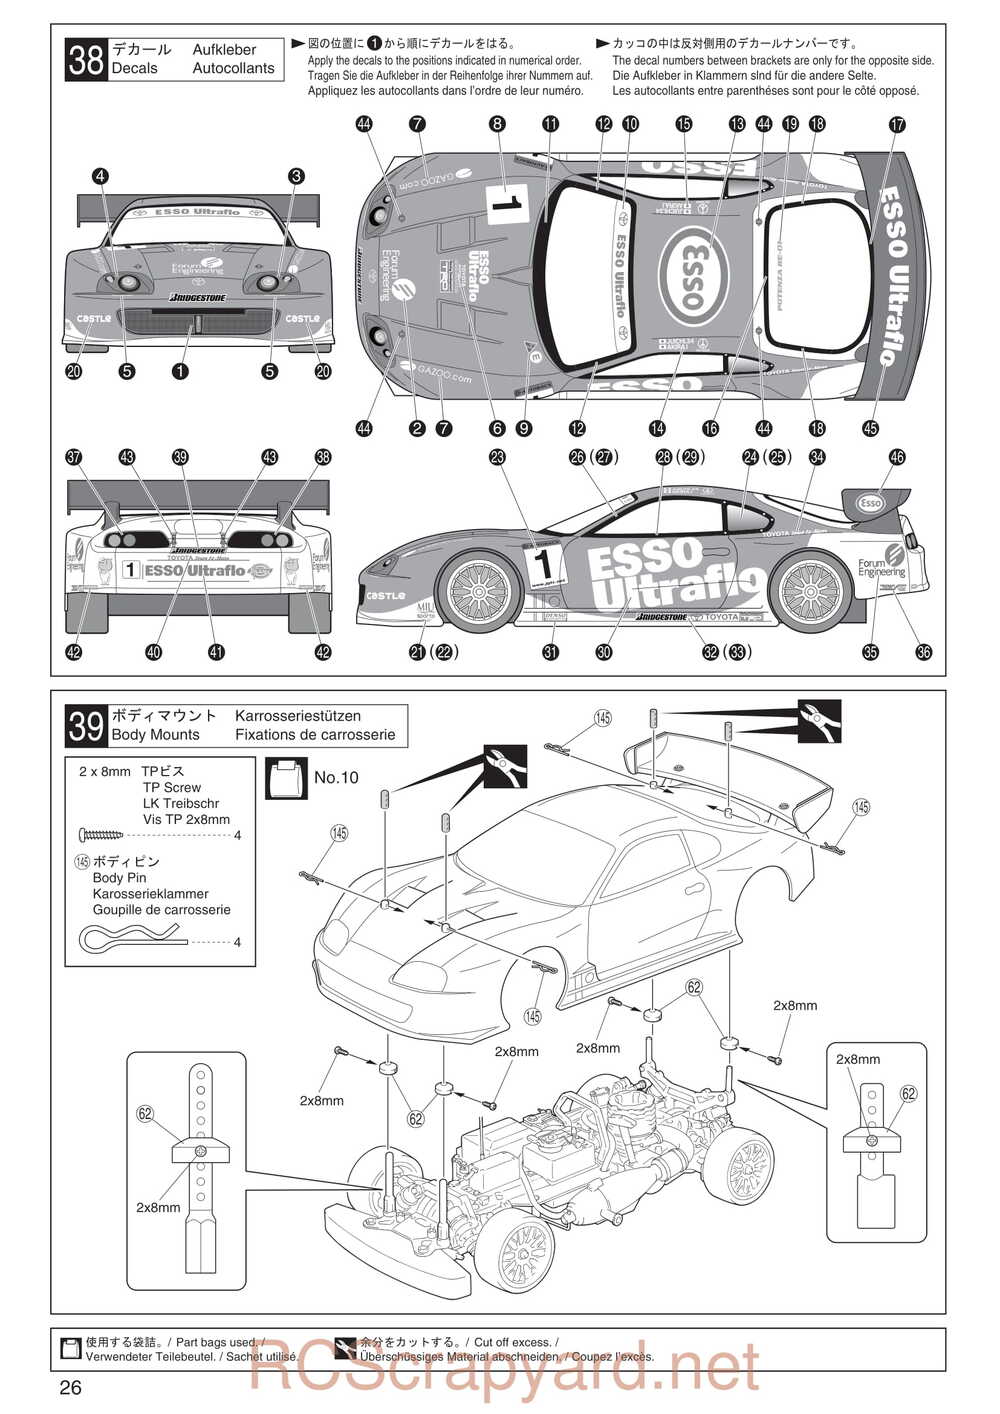 Kyosho - 31122 - V-One S2 - Manual - Page 26